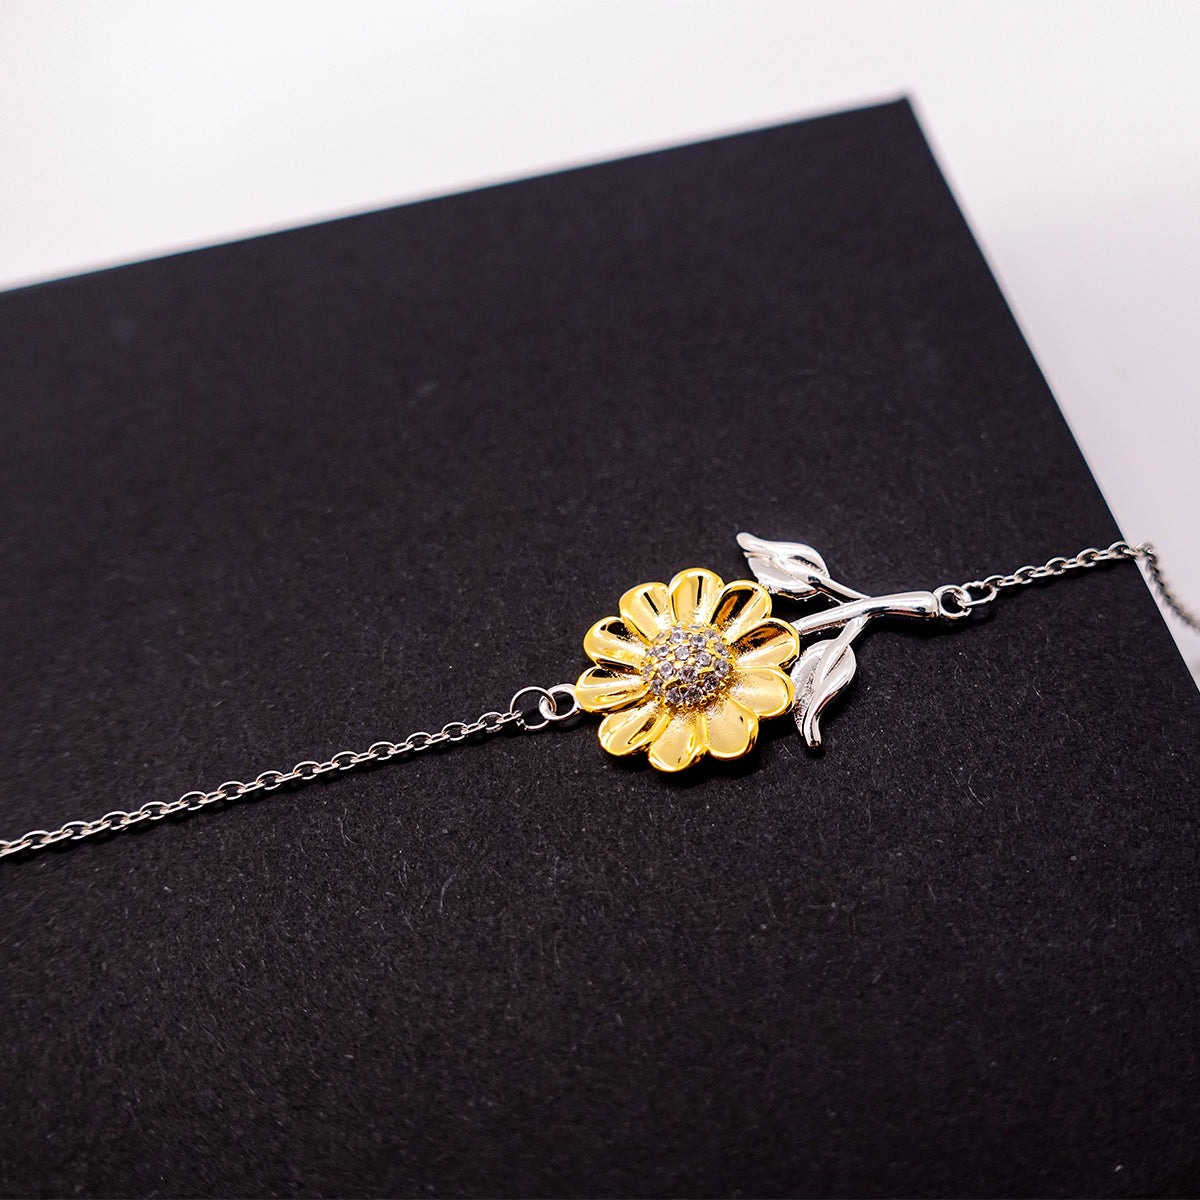 Sunflower Bracelet Godmum Special Place in Heart Engraved Inspirational Jewelry Gift for Birthday Holidays Anniversary Celebration